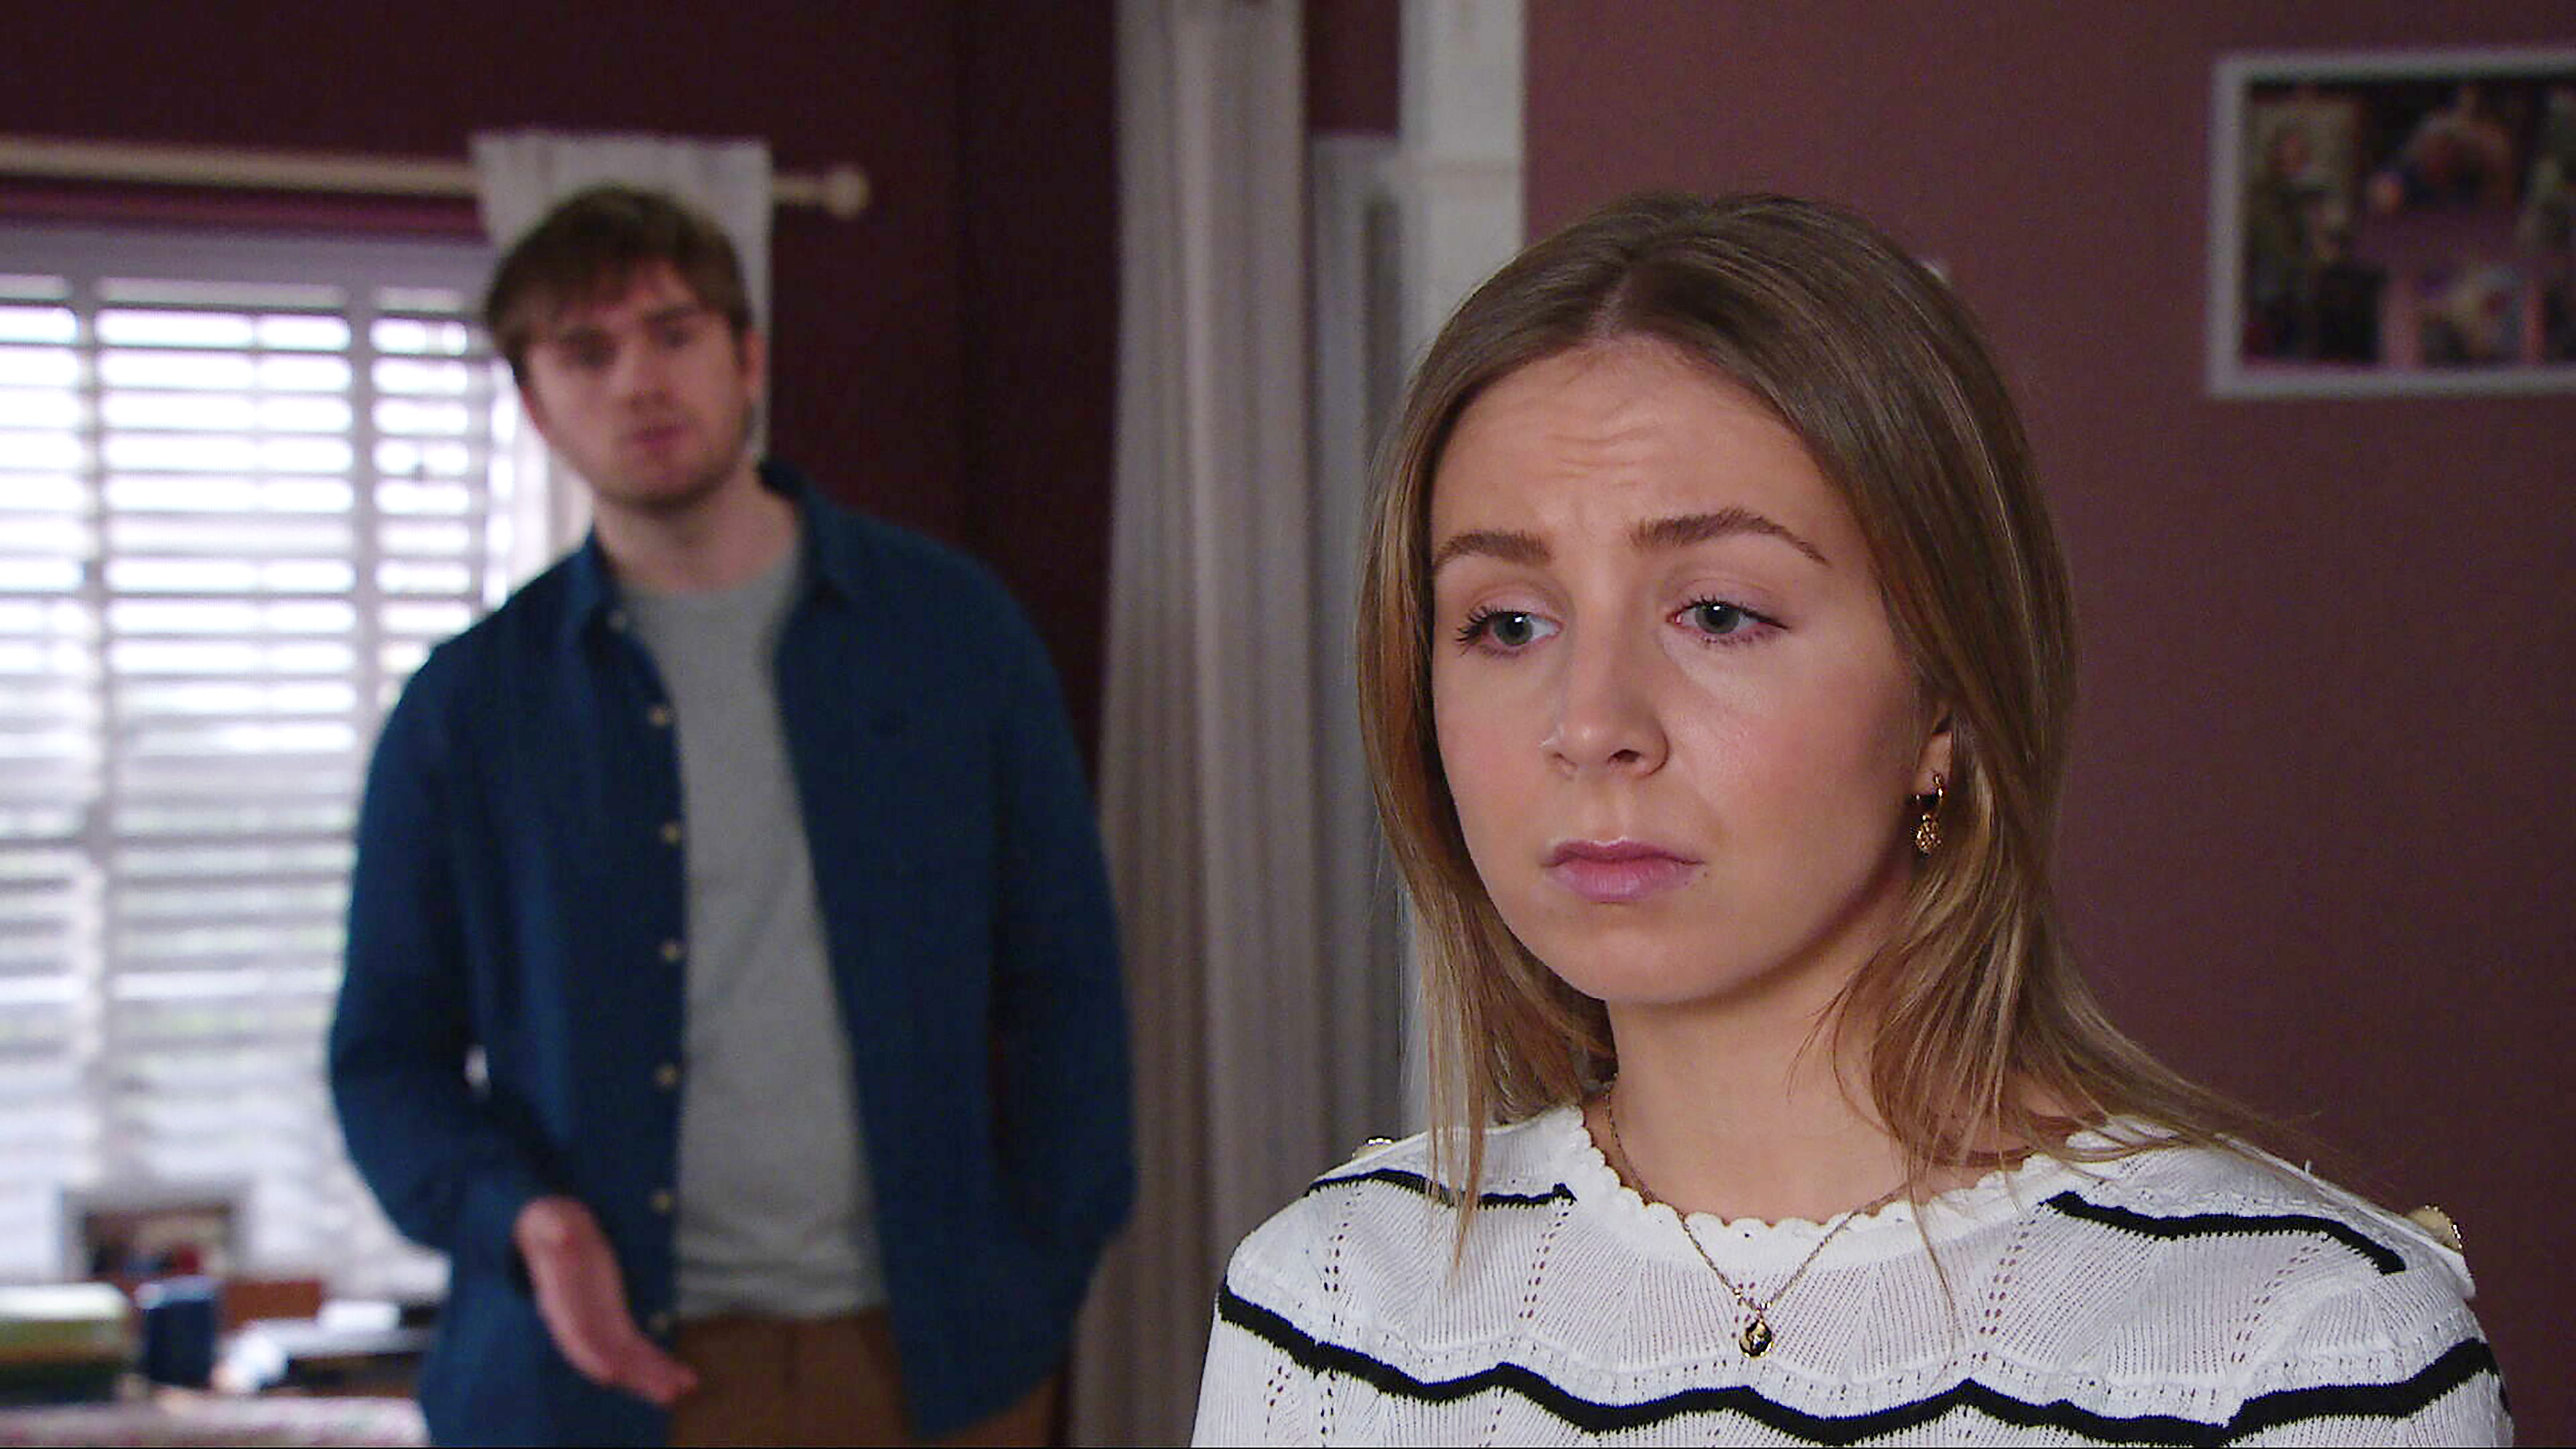 Belle Dingle in pregnancy scare as abusive Tom King gets worse in Emmerdale